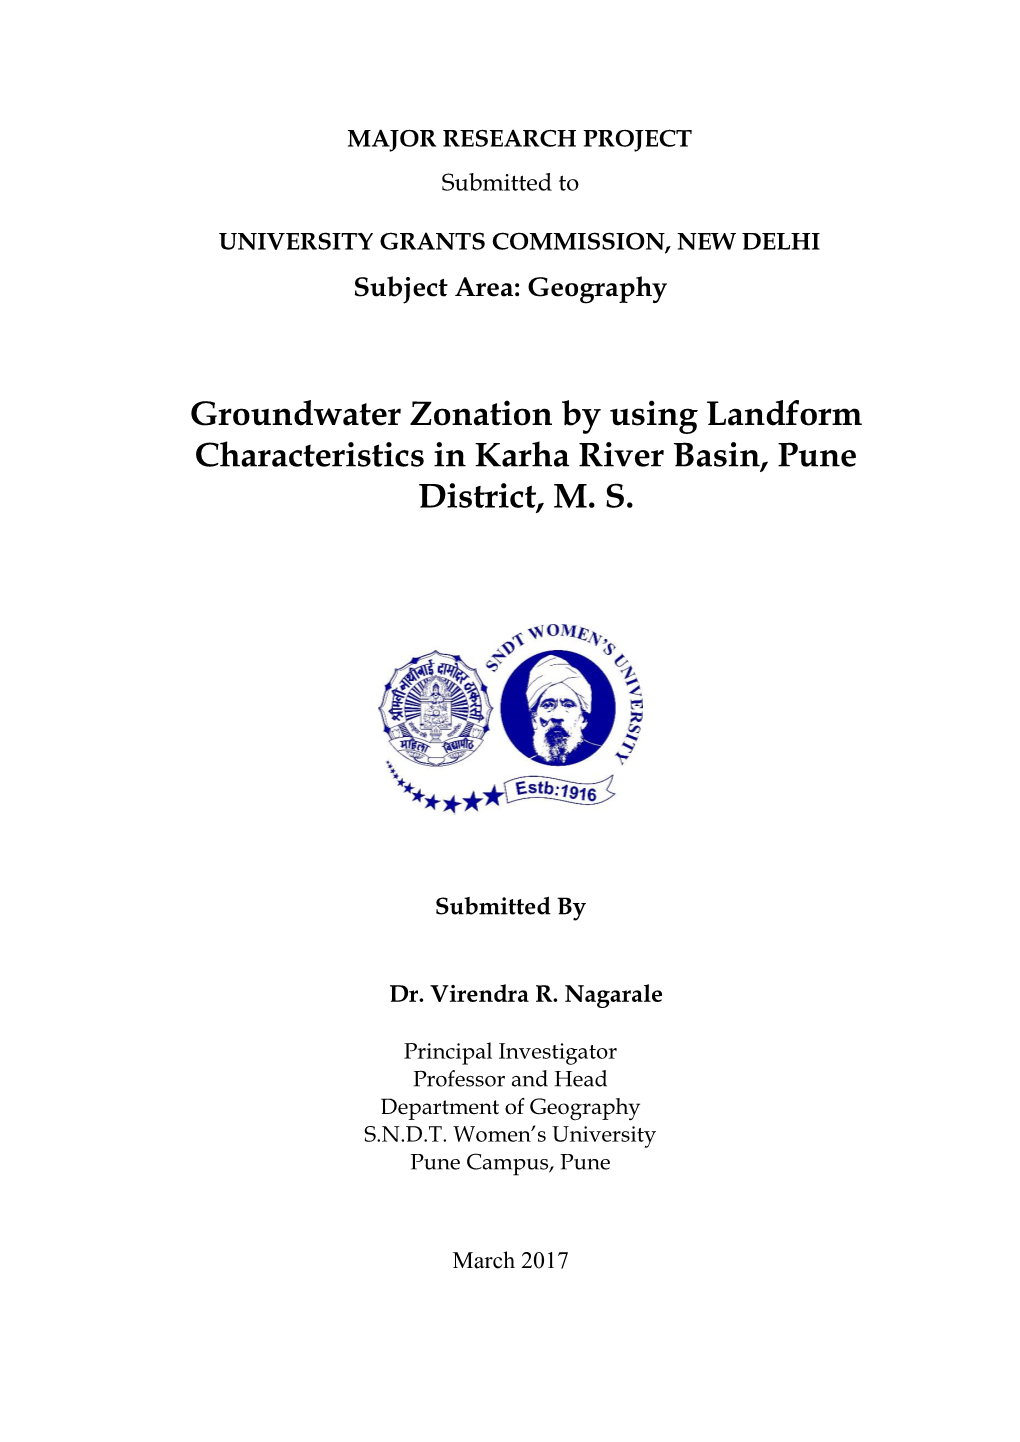 Groundwater Zonation by Using Landform Characteristics in Karha River Basin, Pune District, M